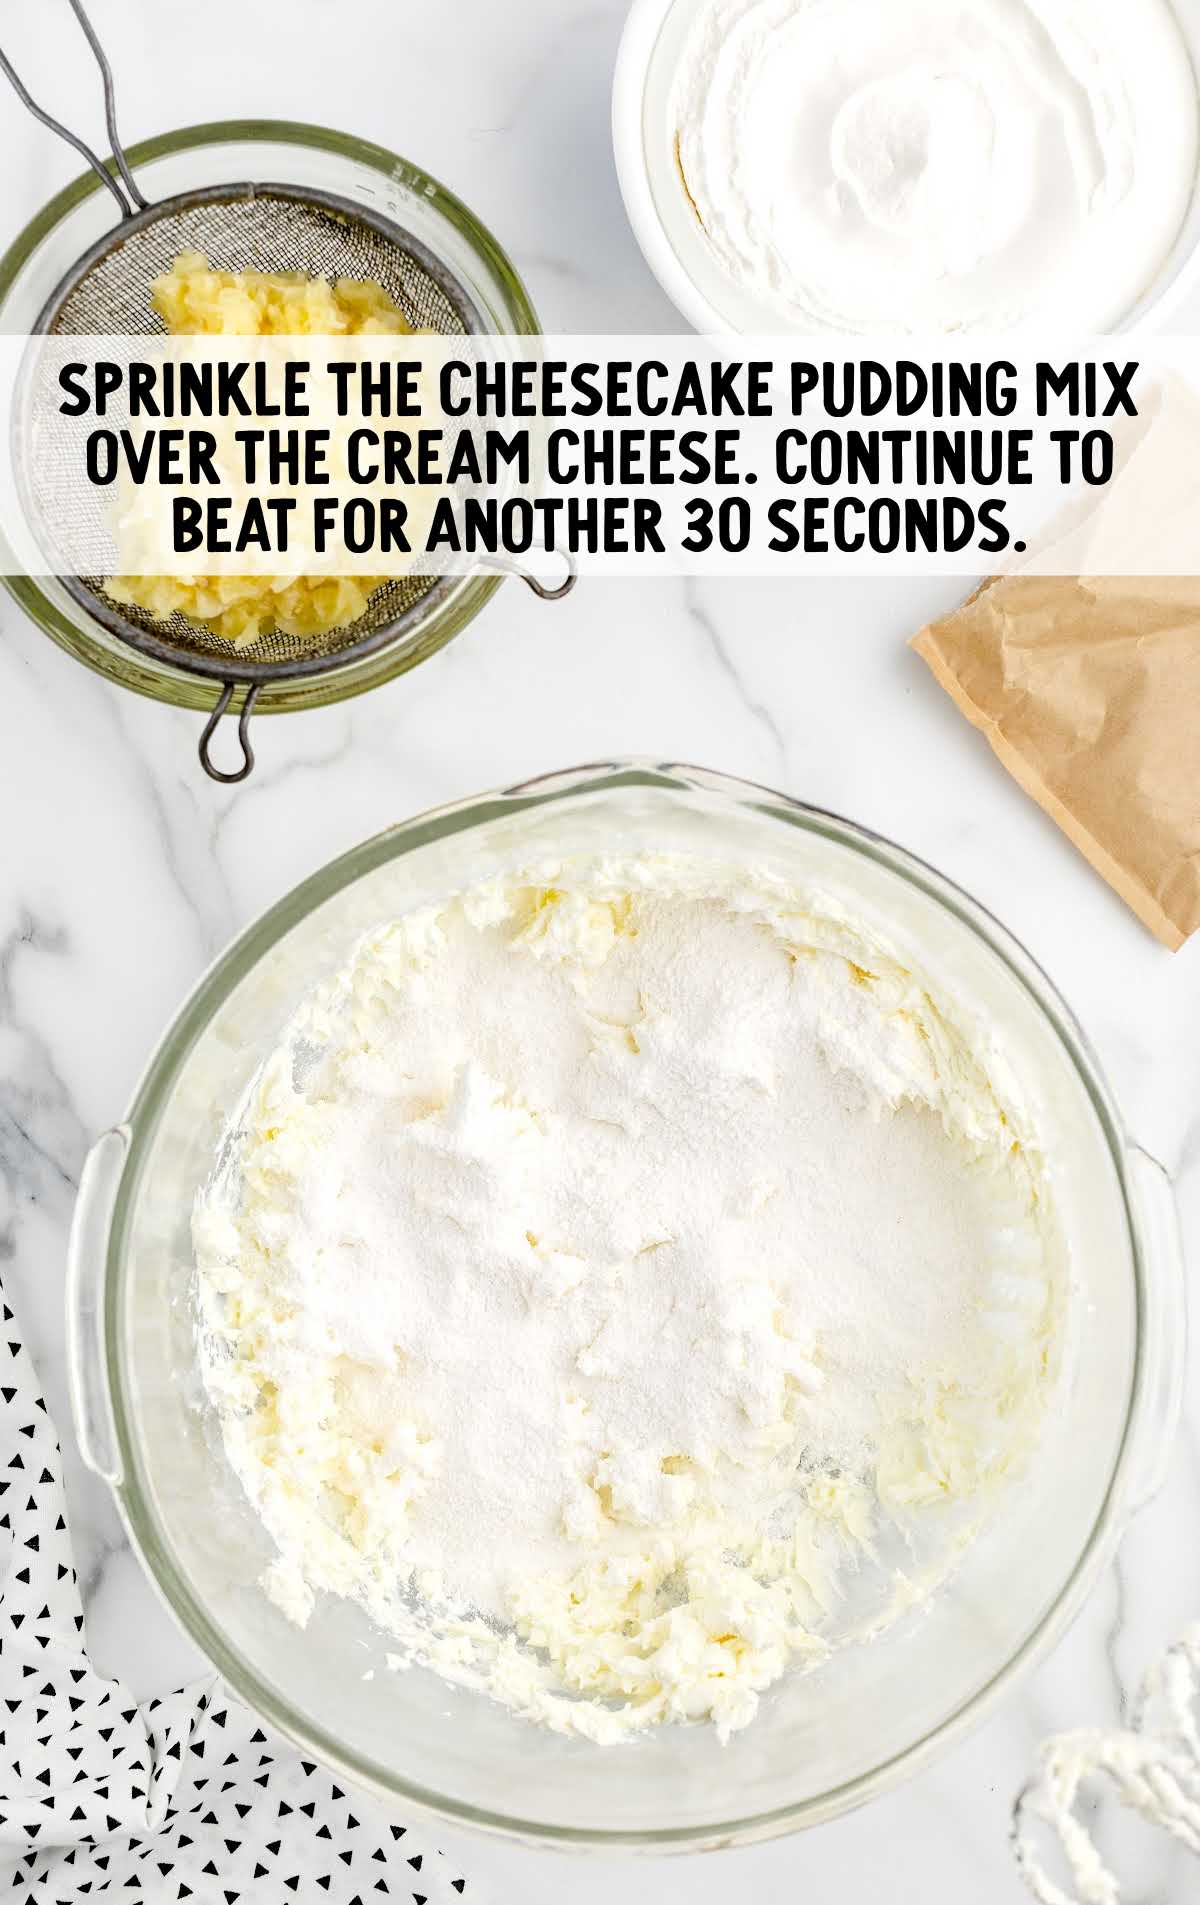 cheesecake pudding mixed sprinkled over the cream cheese in the bowl